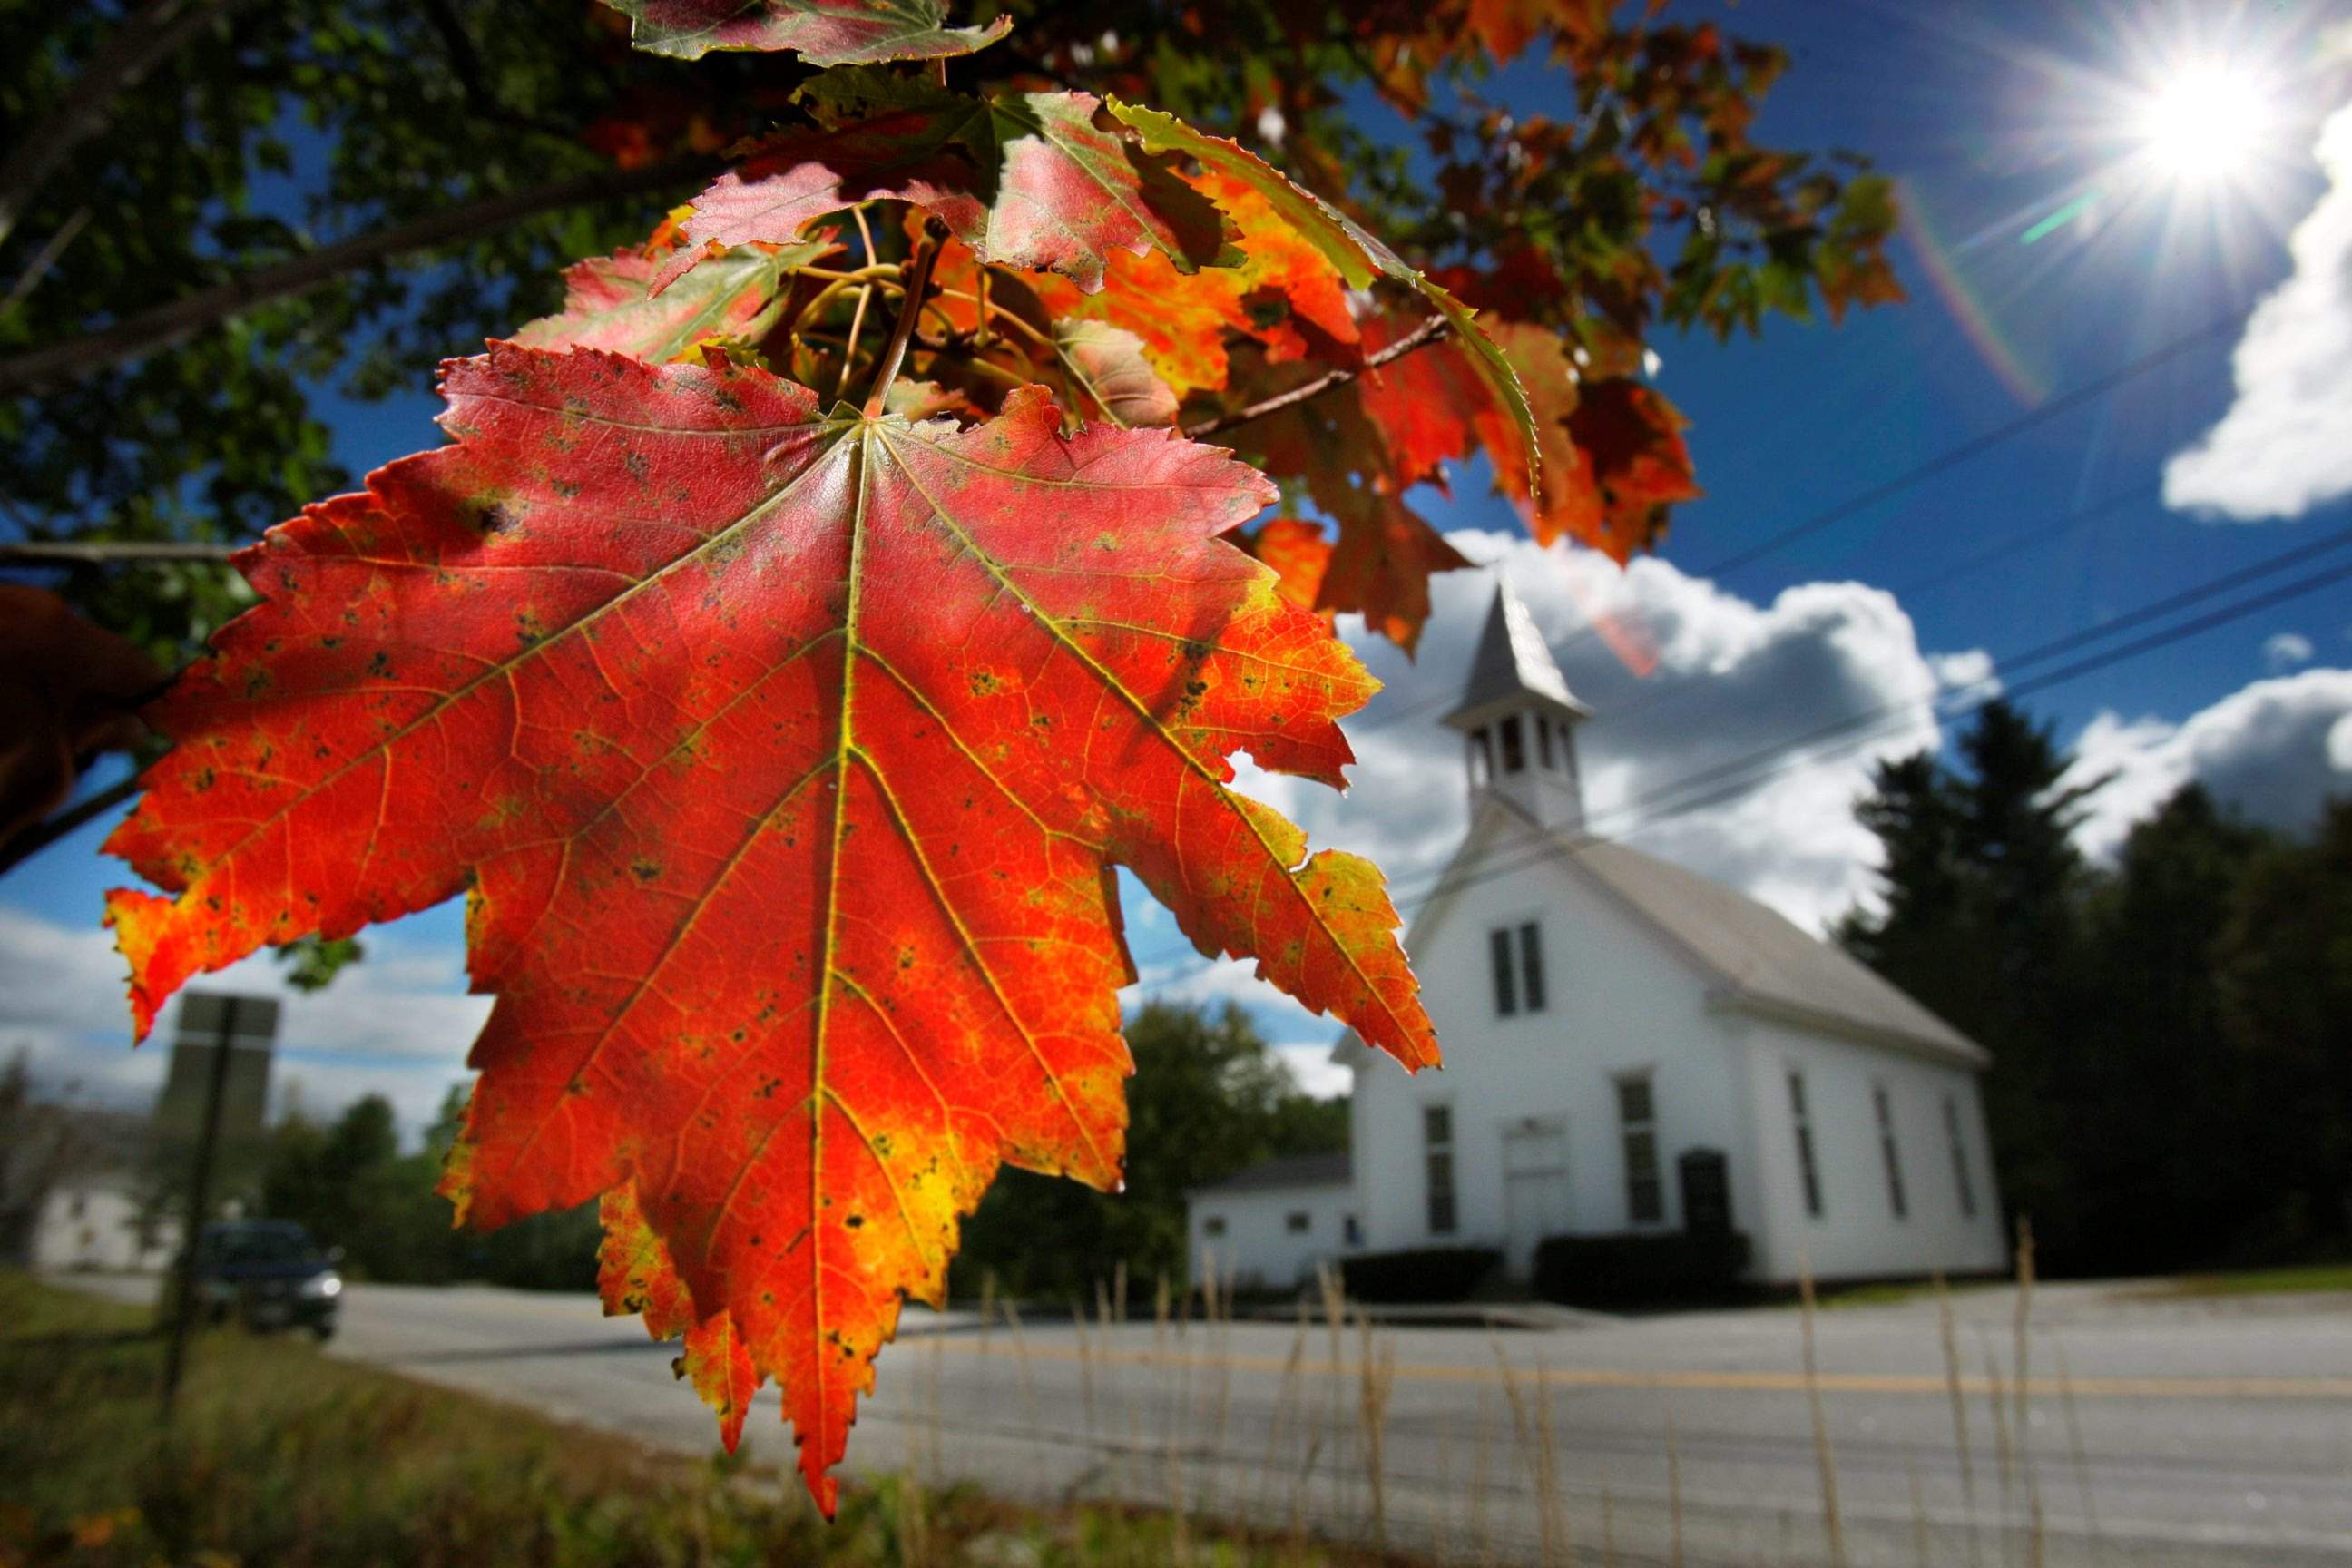 Spectacular' autumn foliage is forecast for New England